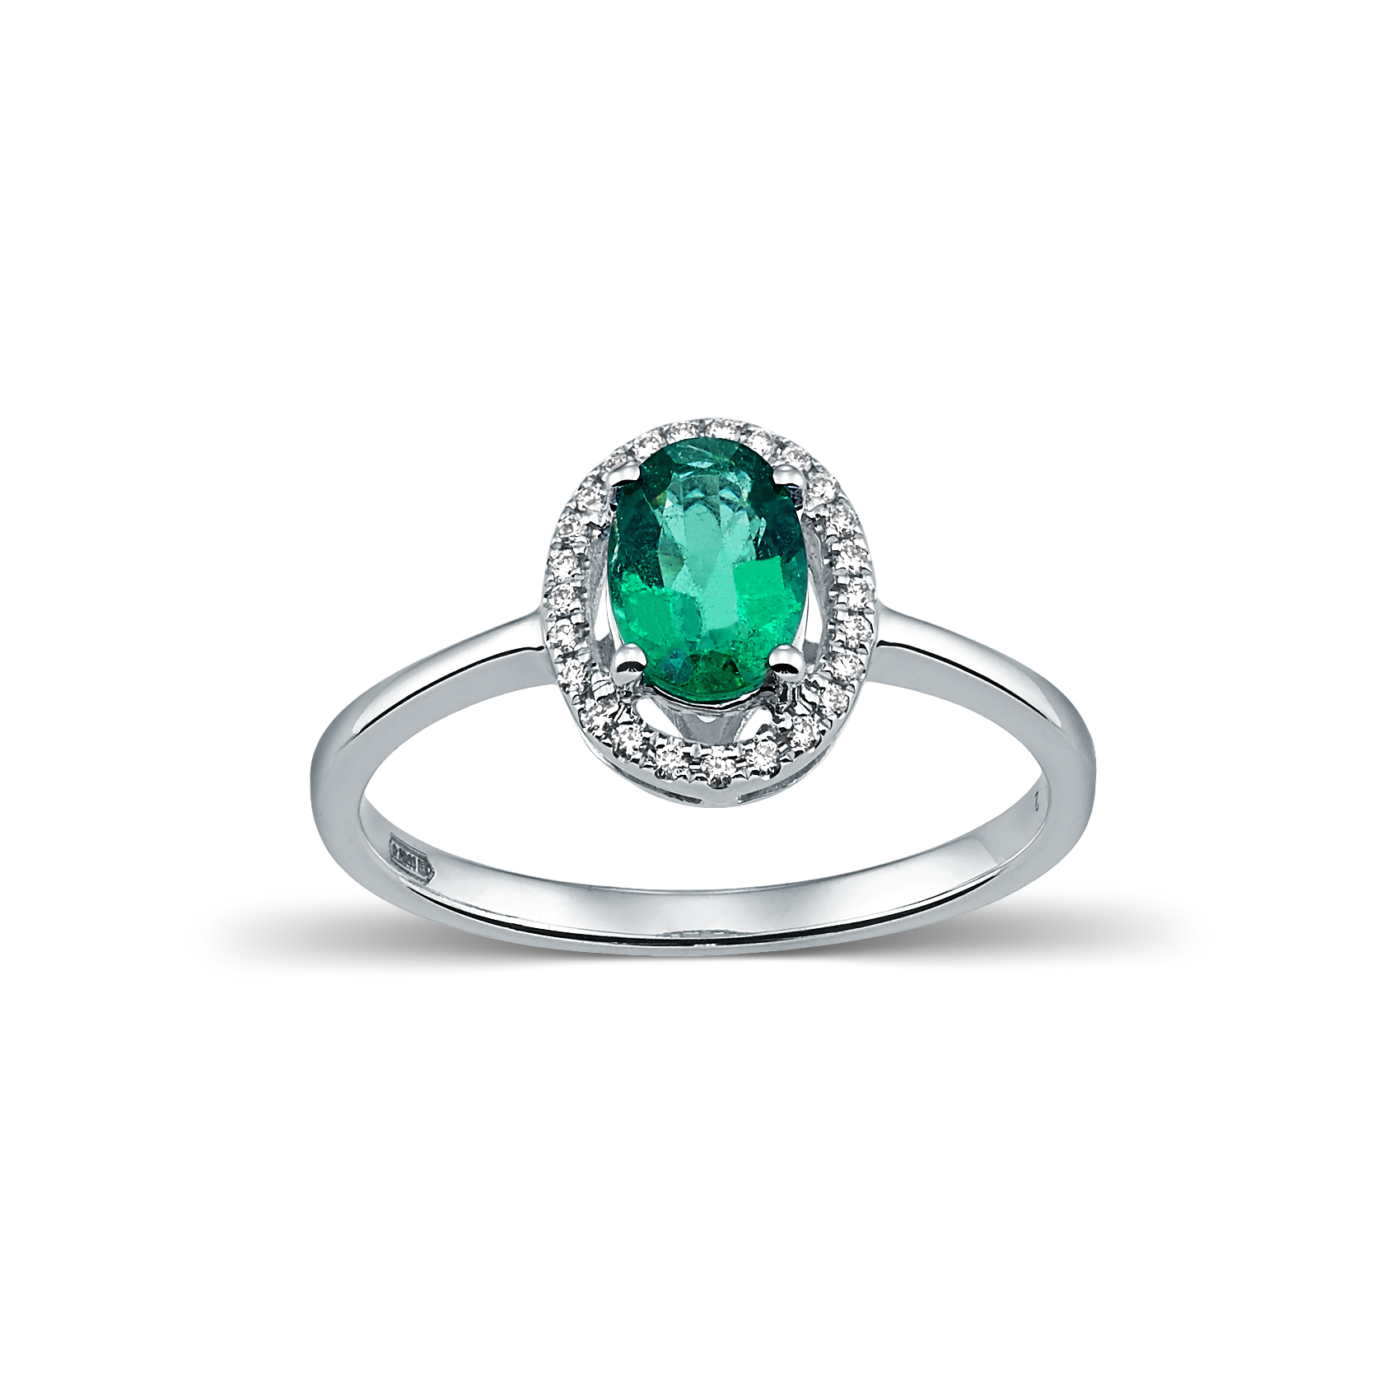 Devous Emerald Ring with Diamonds